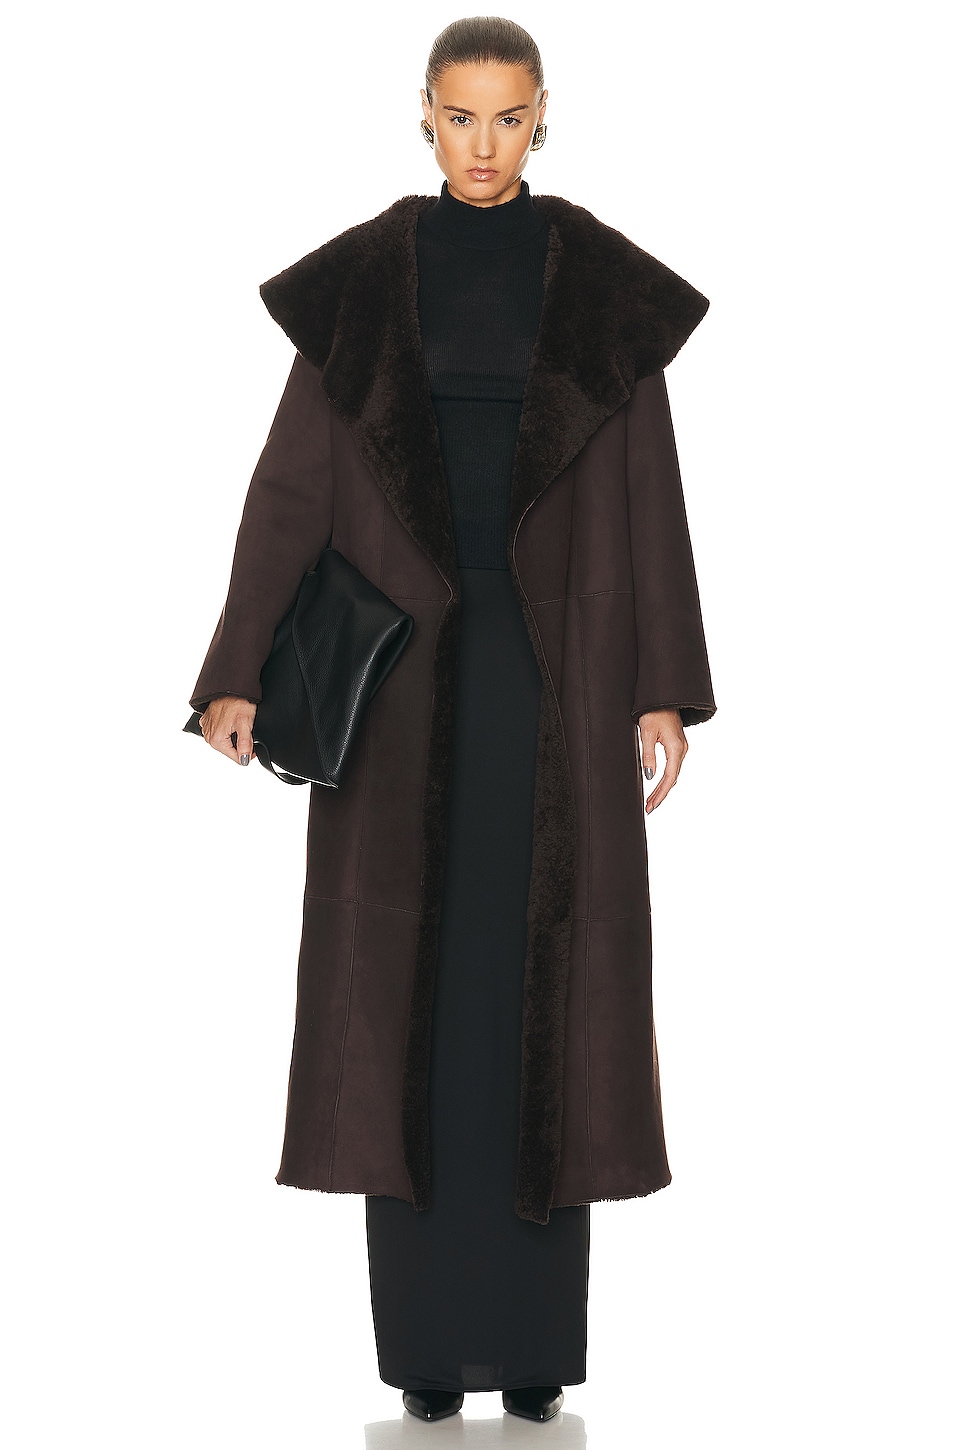 Image 1 of NOUR HAMMOUR Agnes Ankle Length Reversible Shearling Coat in Dark Chocolate